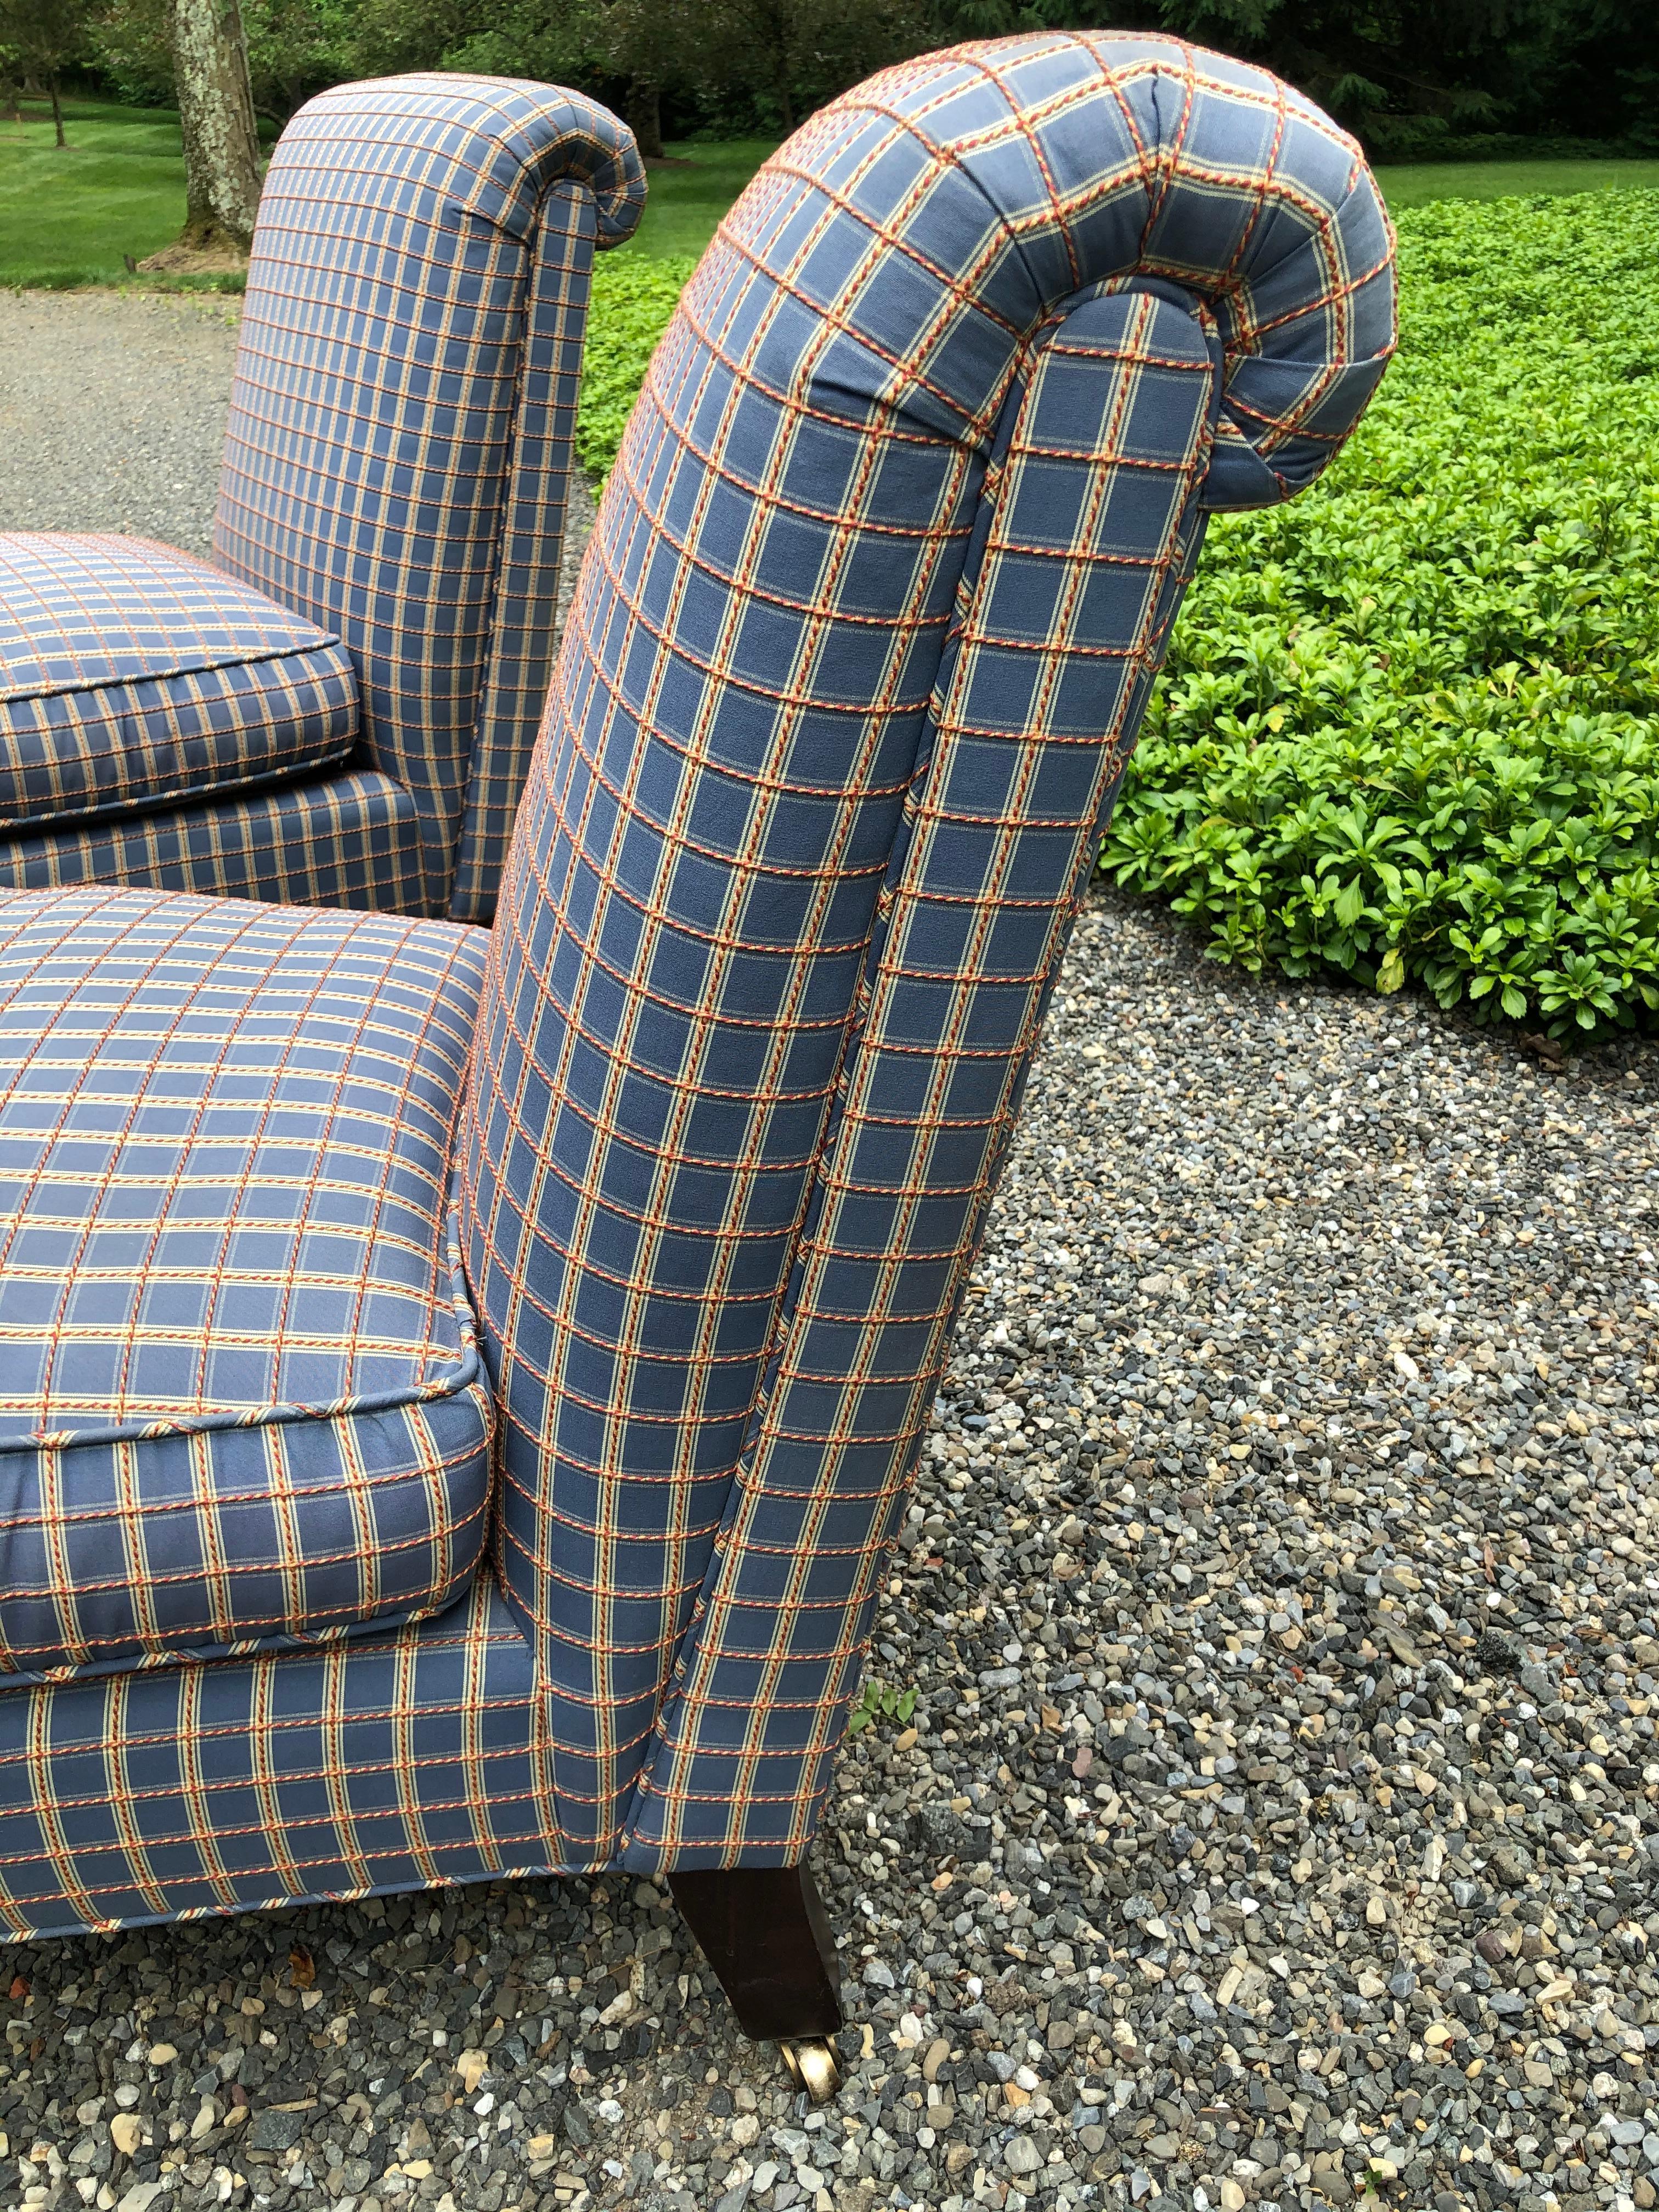 A very handsome pair of slipper chairs by Lee Jofa upholstered in a cornflower blue plaid with gold and persimmon threading and cushions that are down and feather filled. The front legs are turned mahogany on casters, while the rear legs are splayed